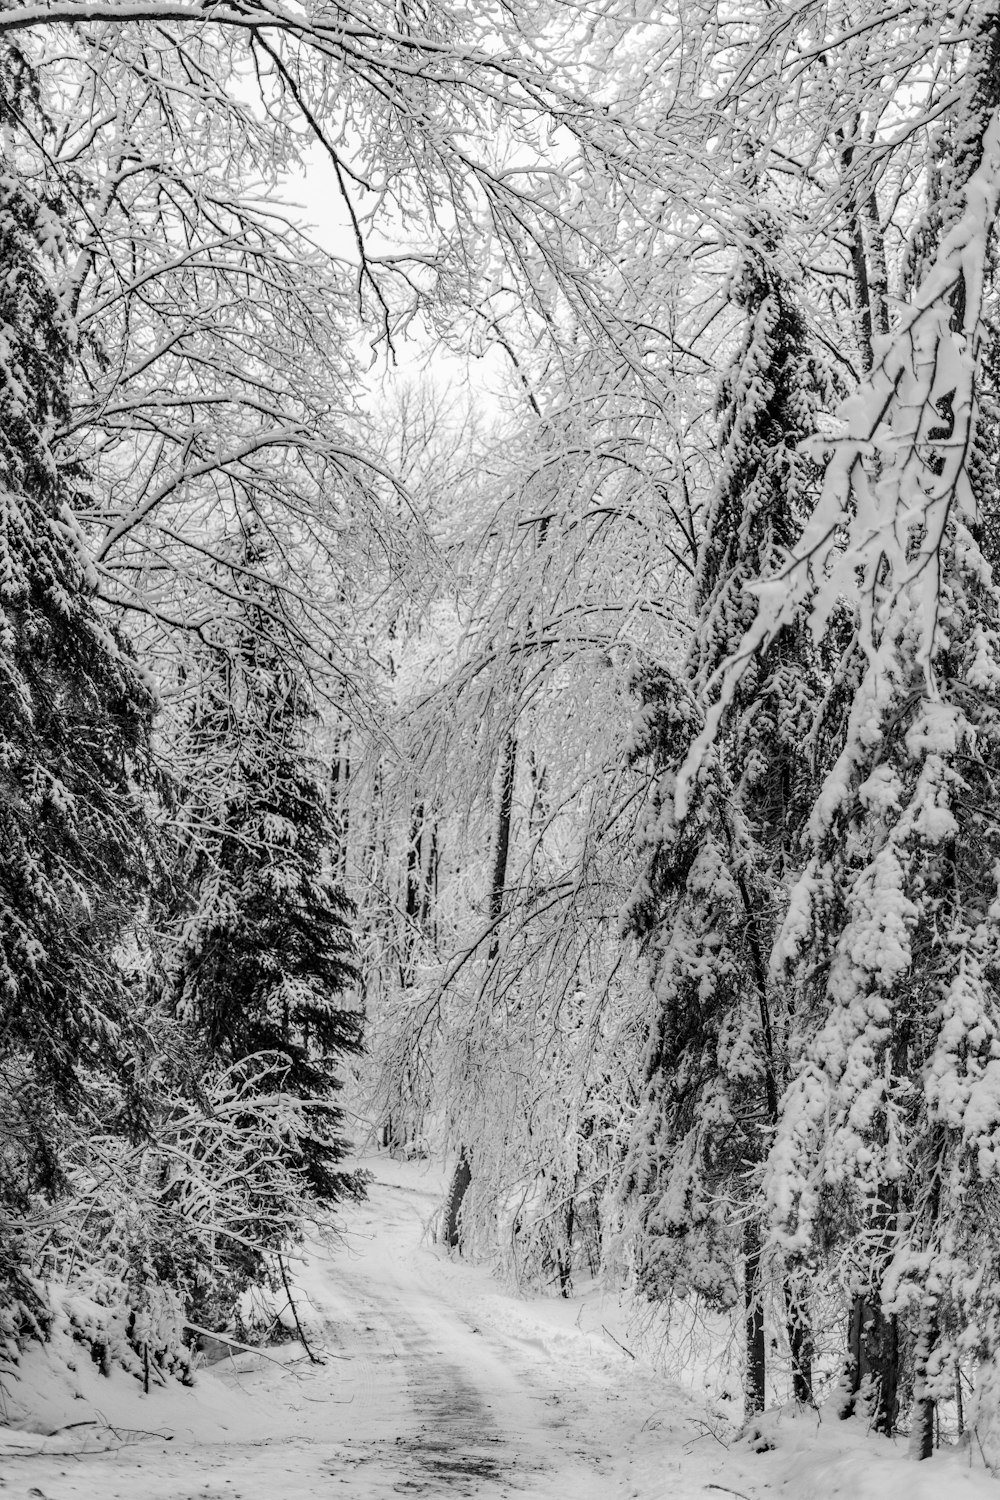 a snow covered road surrounded by trees